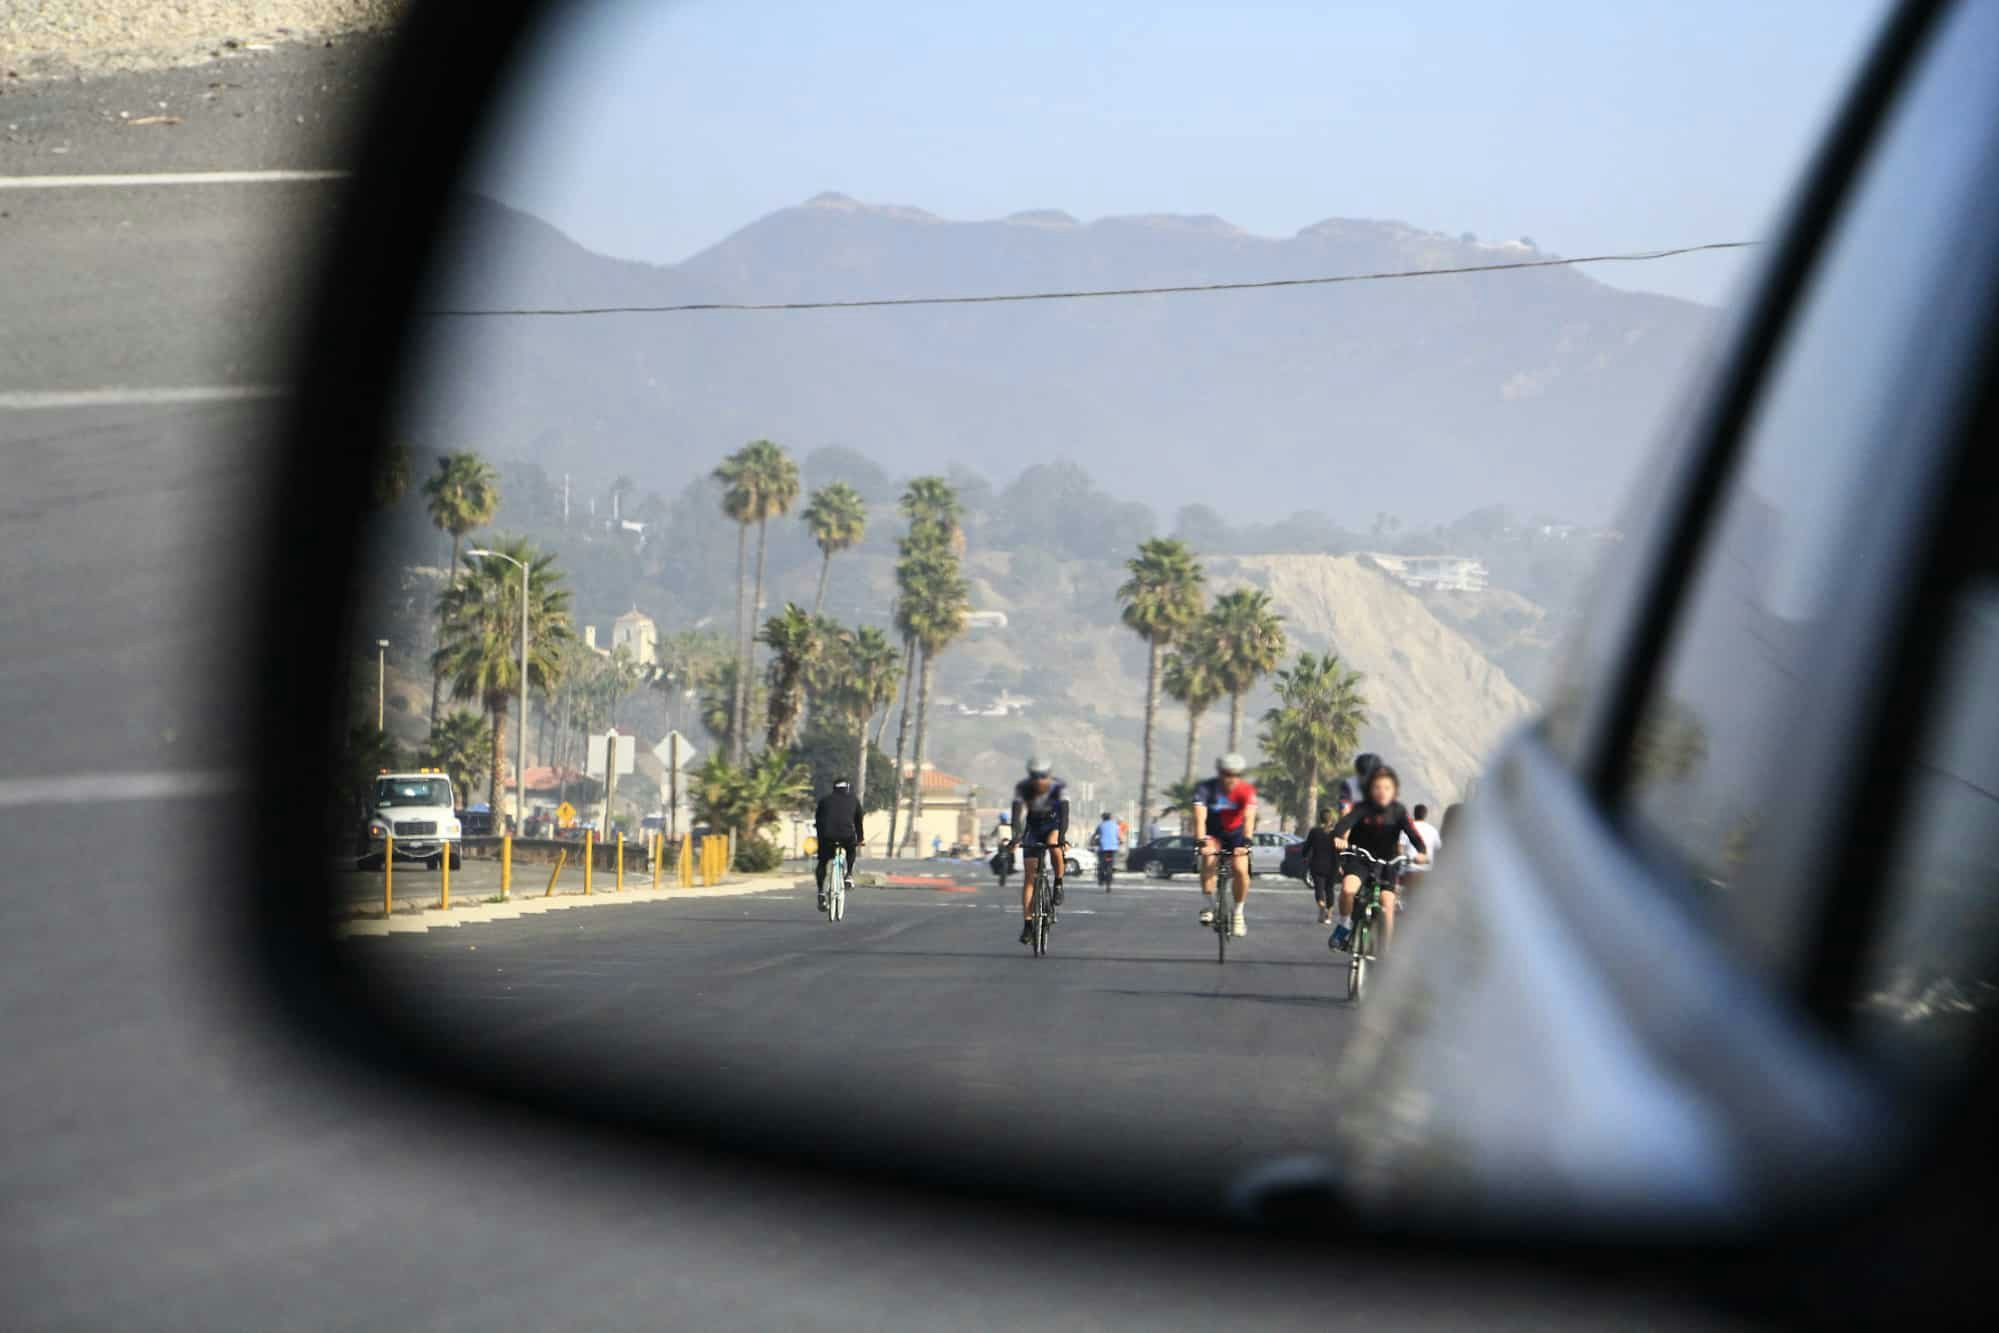 Cyclists in the car mirror